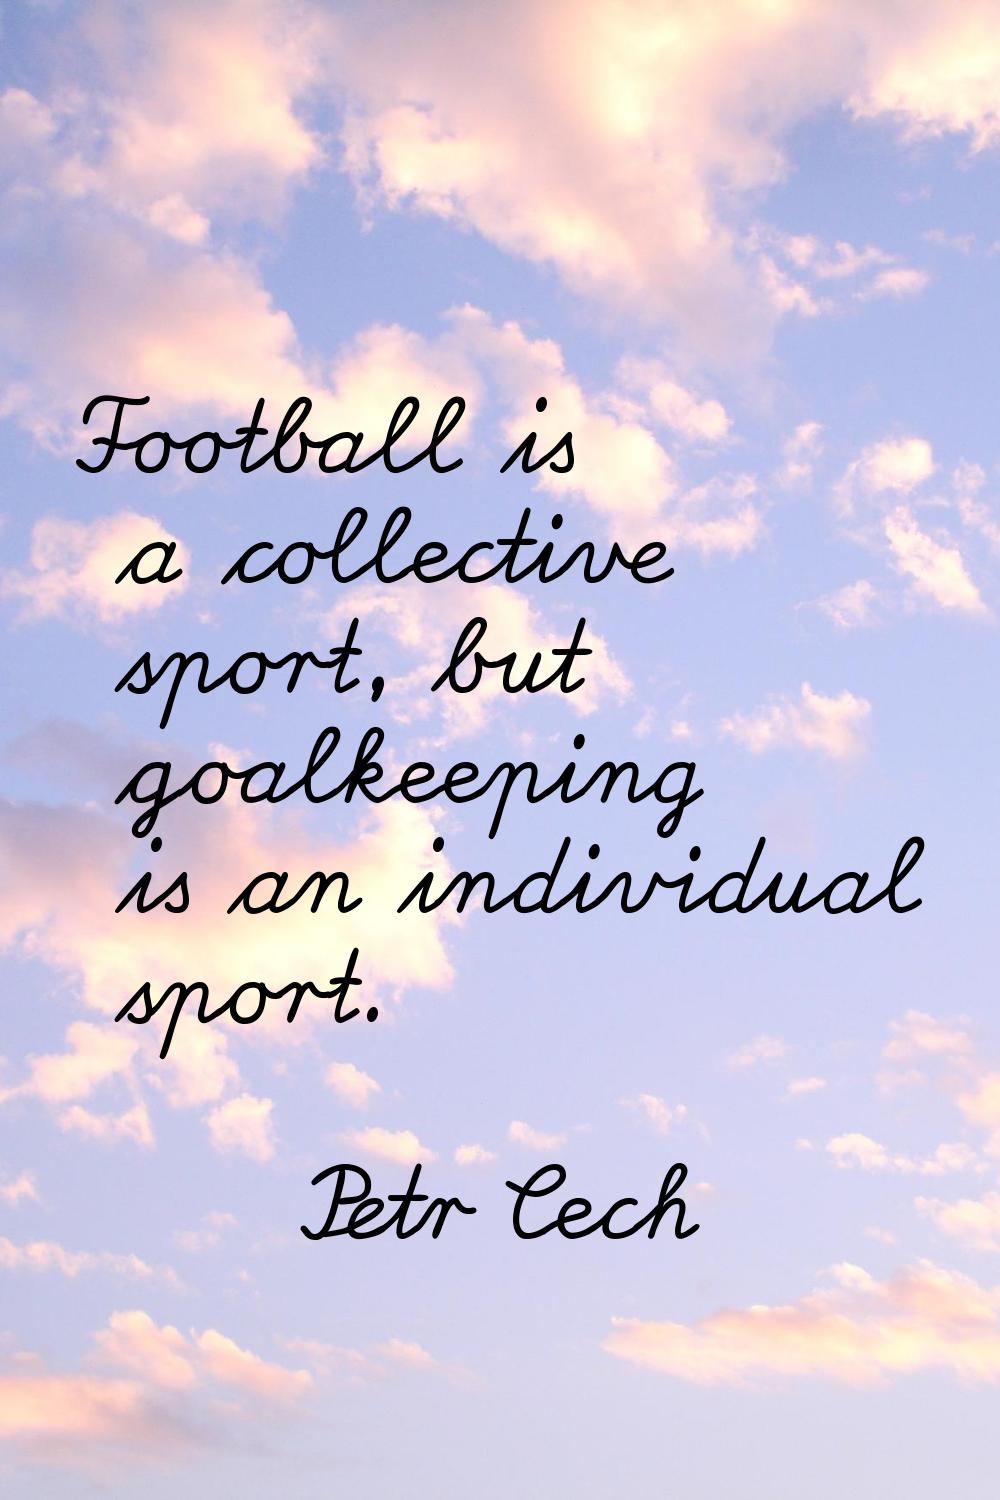 Football is a collective sport, but goalkeeping is an individual sport.